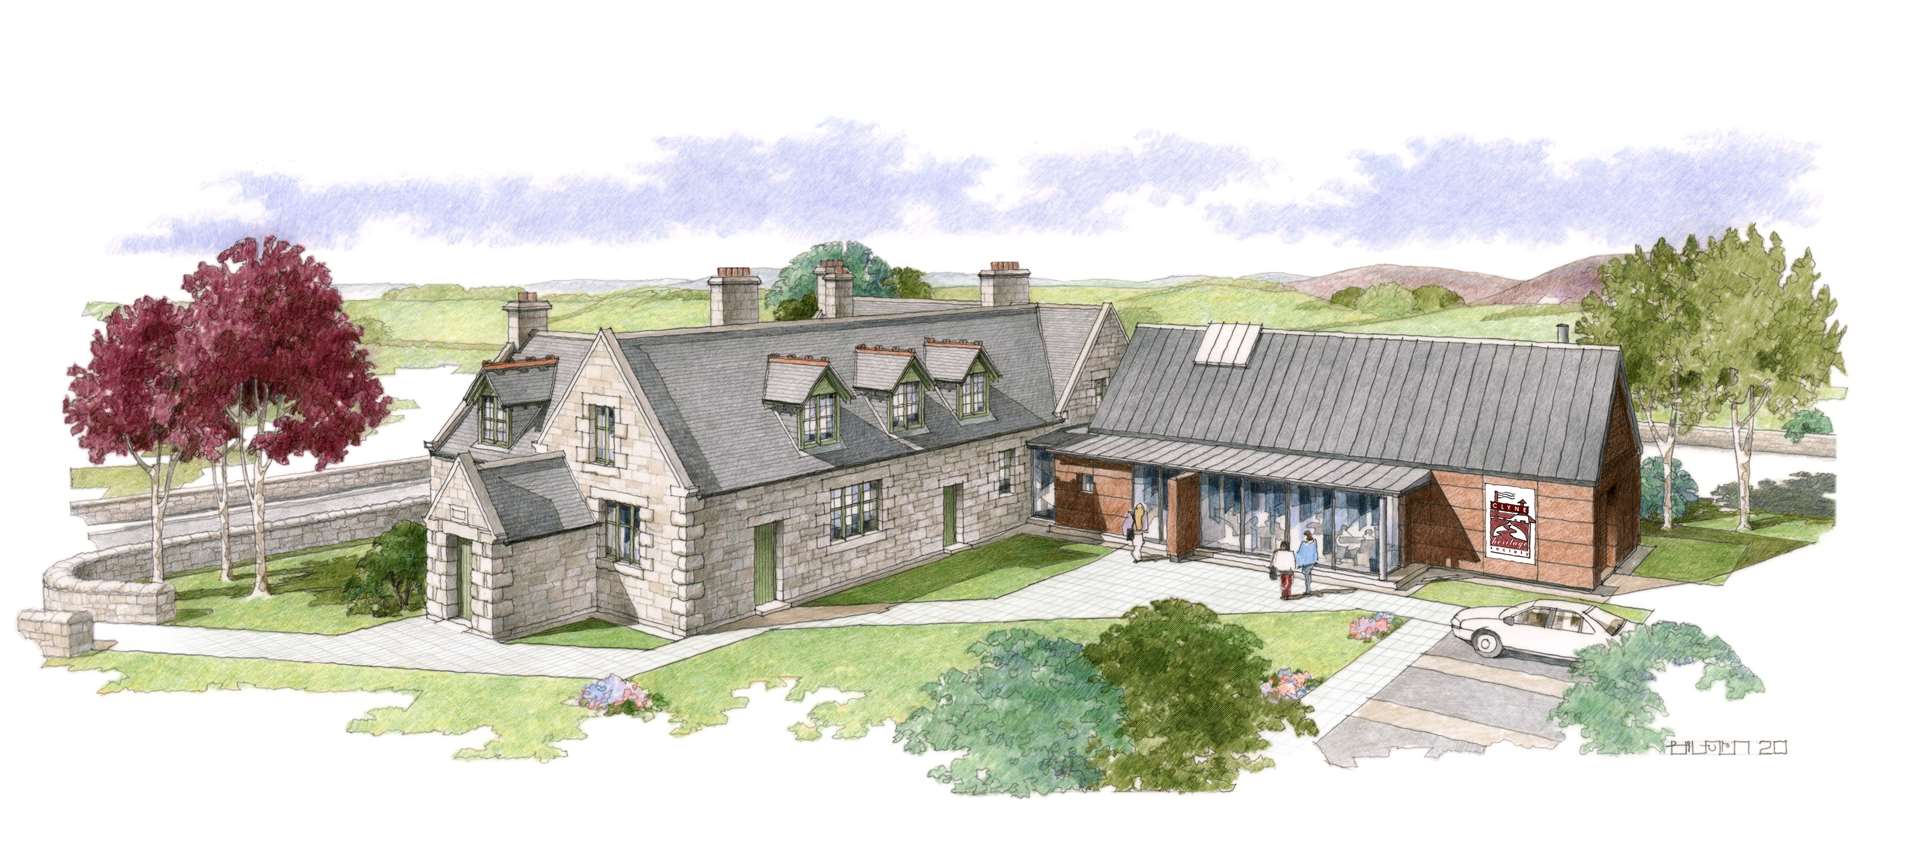 An artist's impression of Old Clyne School, once transformed into a heritage hub and visitor centre.